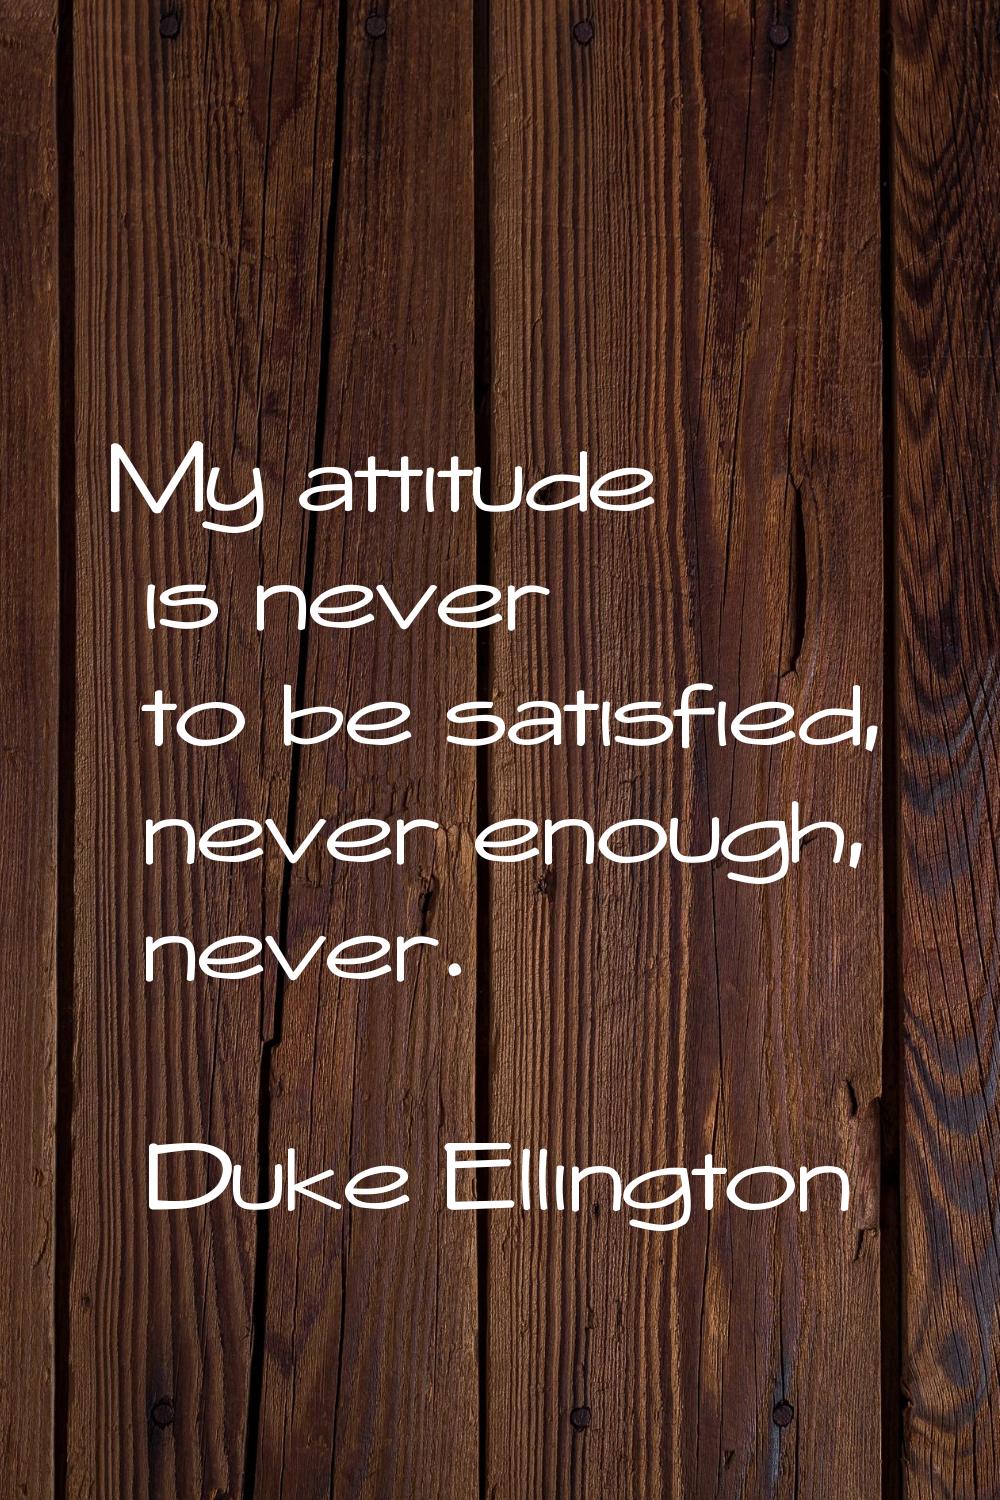 My attitude is never to be satisfied, never enough, never.